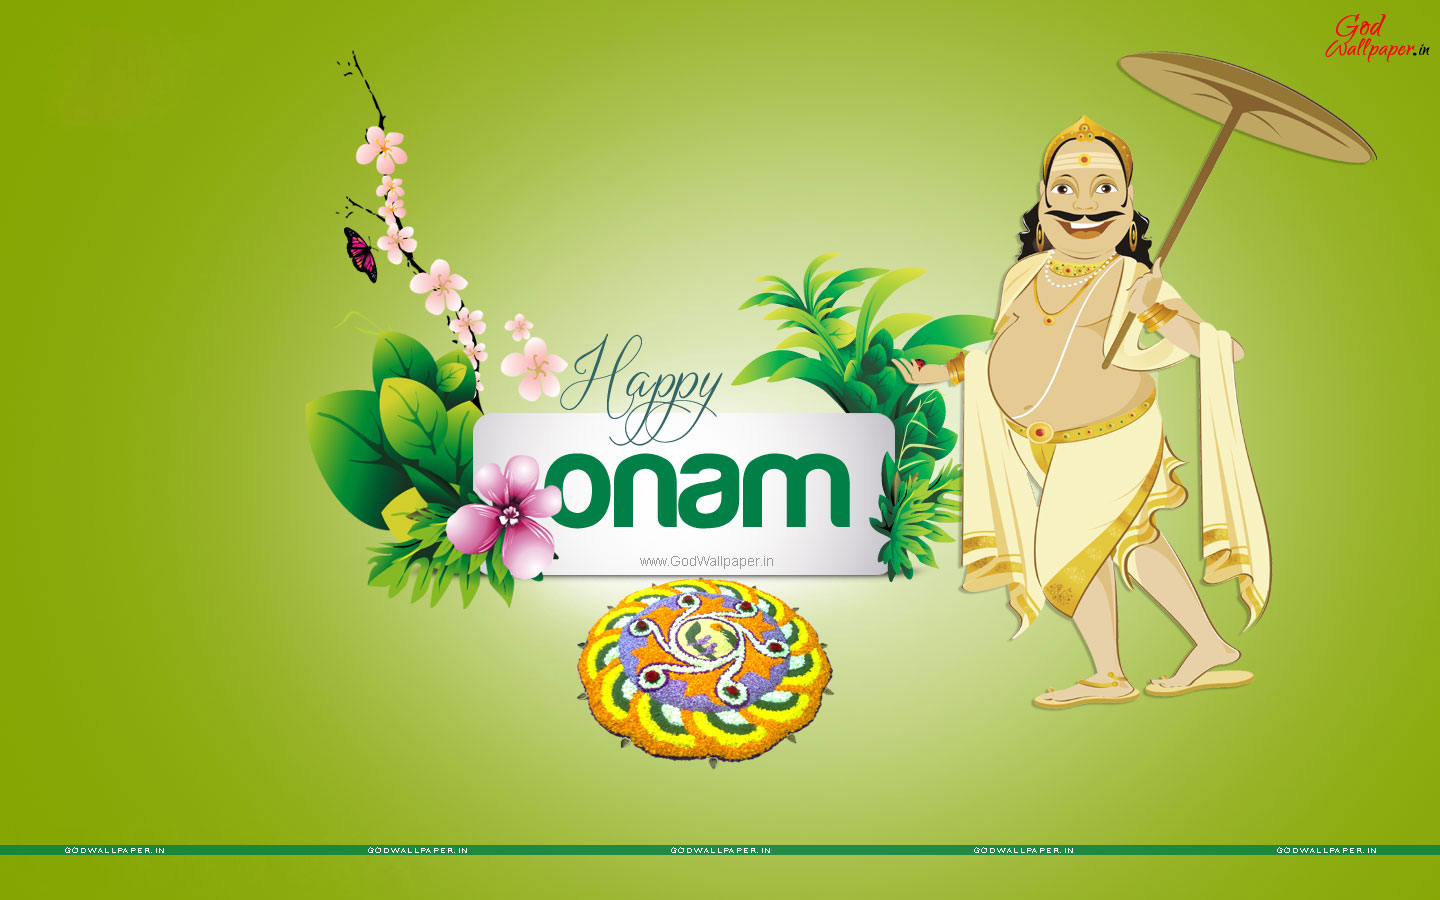 Onam live wallpapers images free download